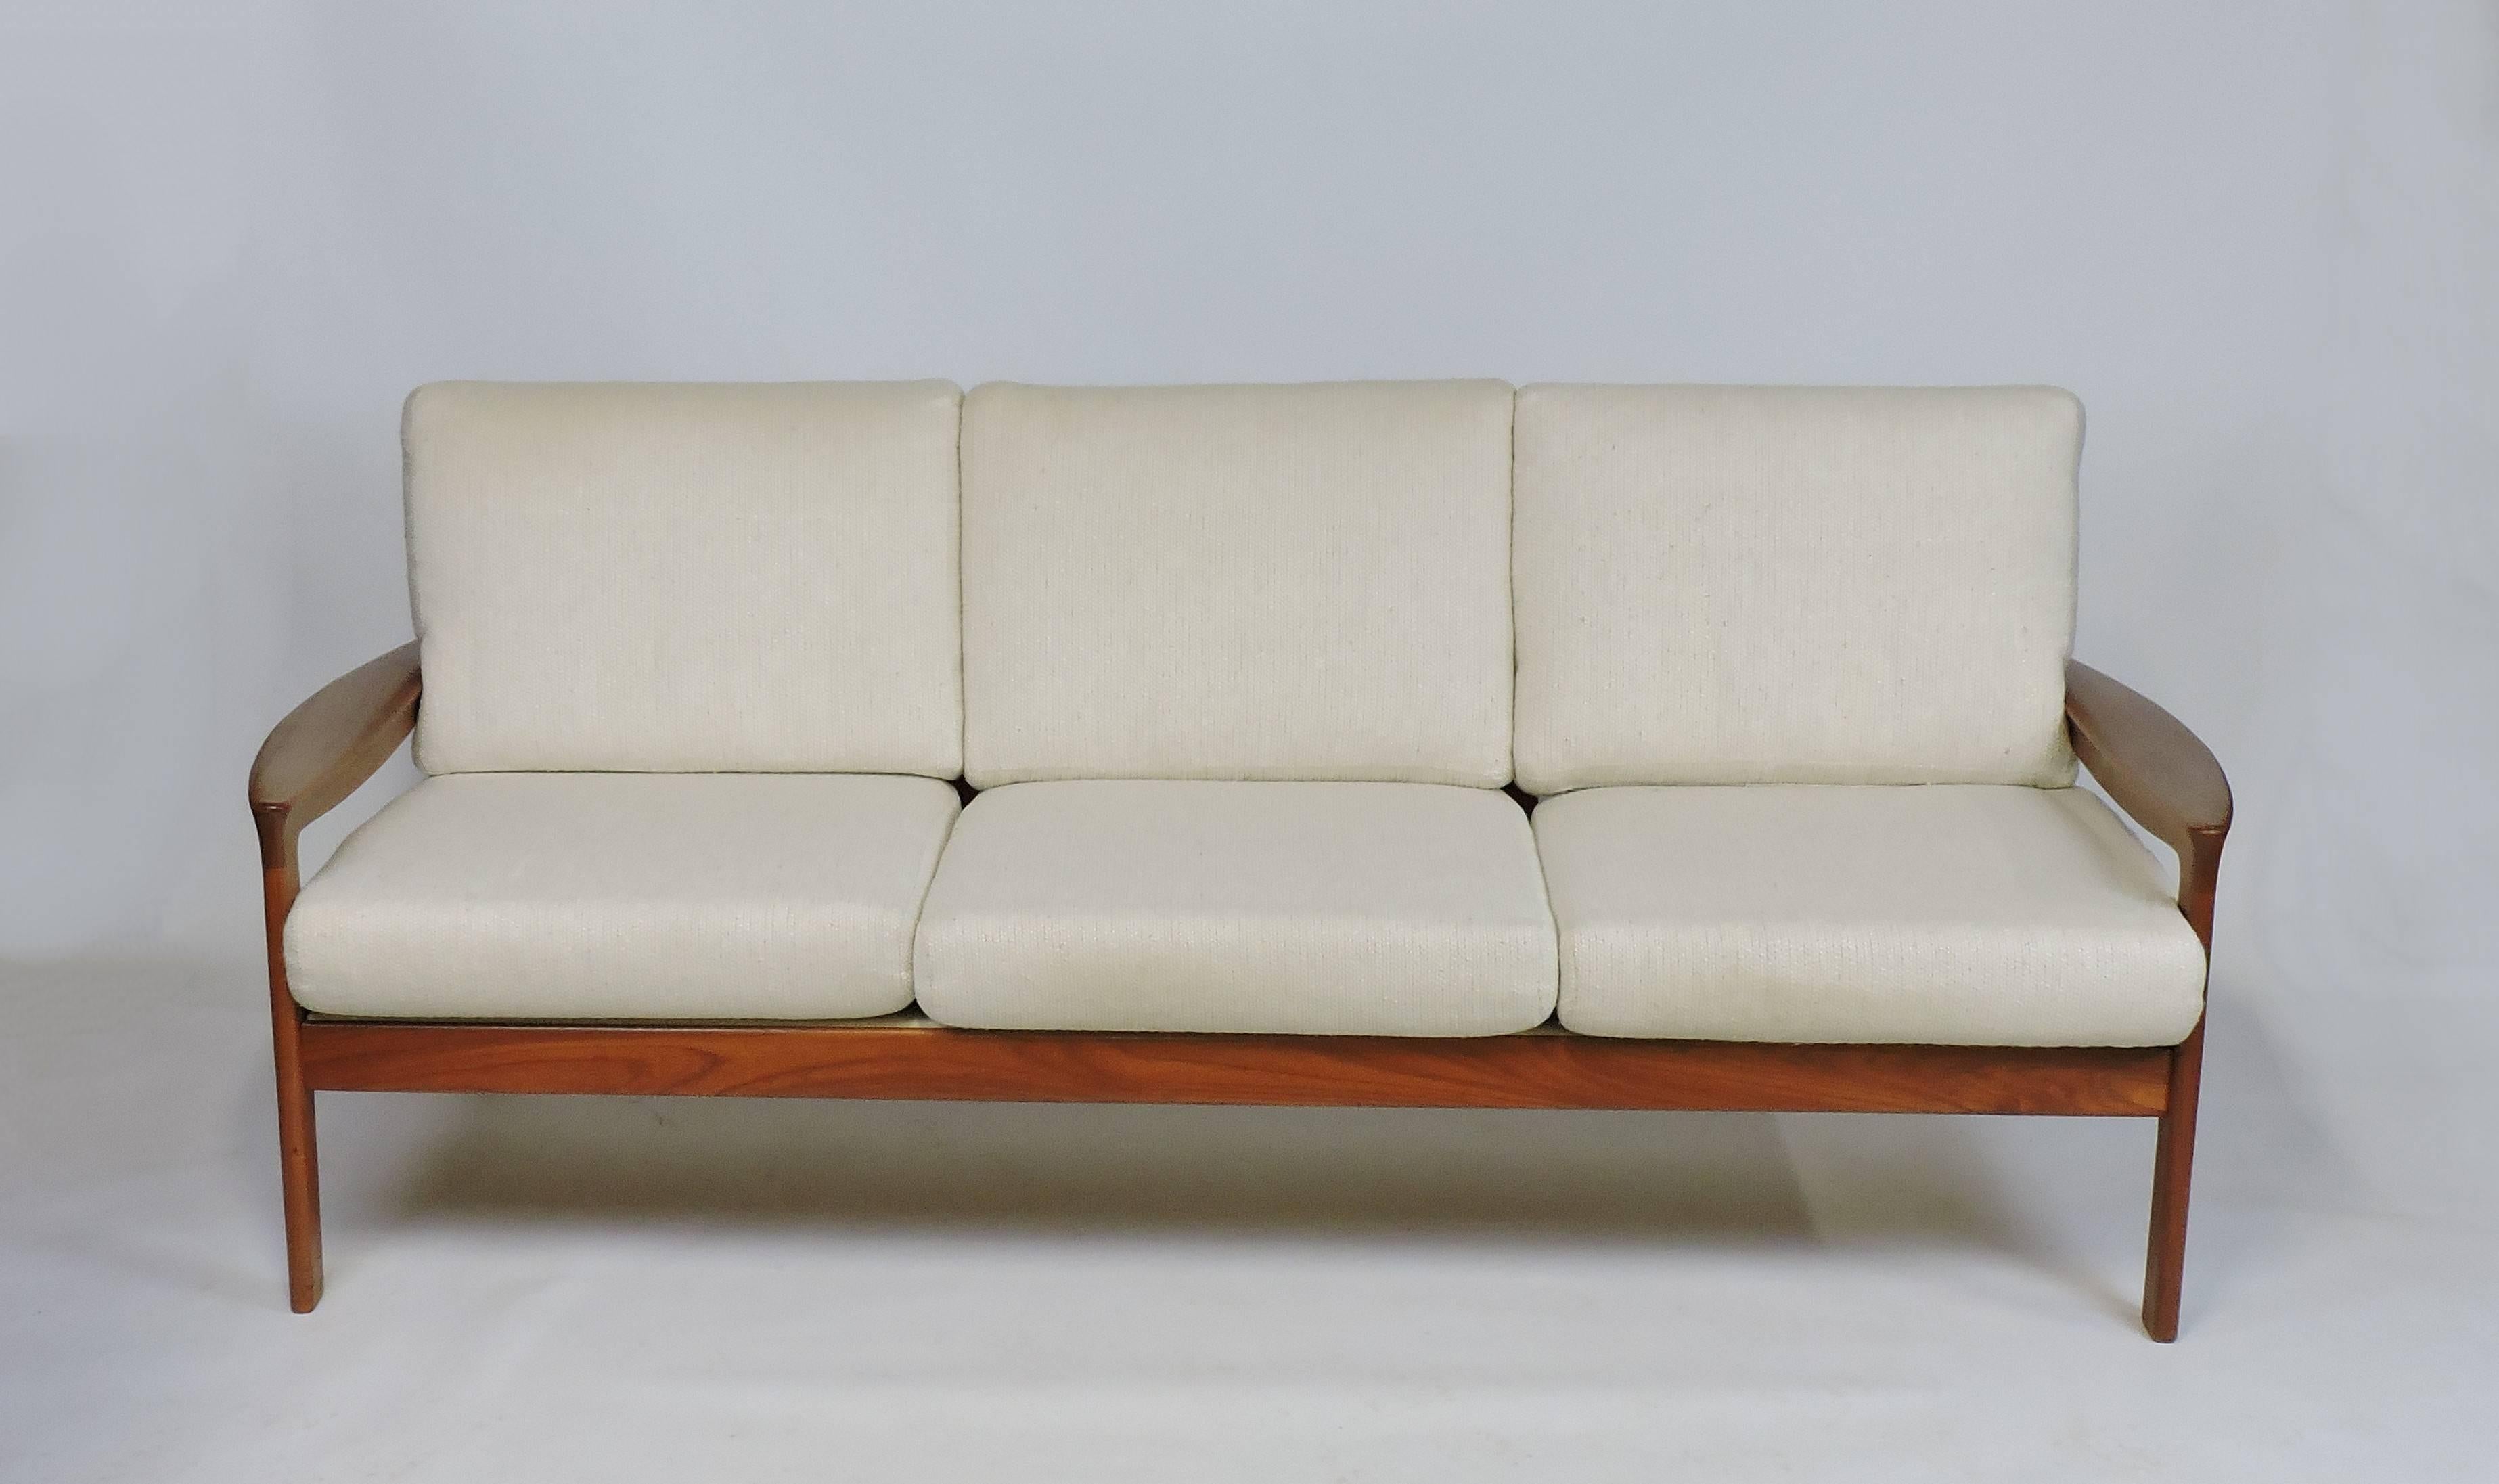 Beautiful and comfortable three-seat sofa made by Komfort of Denmark. It has great craftsmanship with a sculpted solid teak frame with paddle arms, and a slat back. The zippered cushions have the original off-white textured upholstery. Marked with a